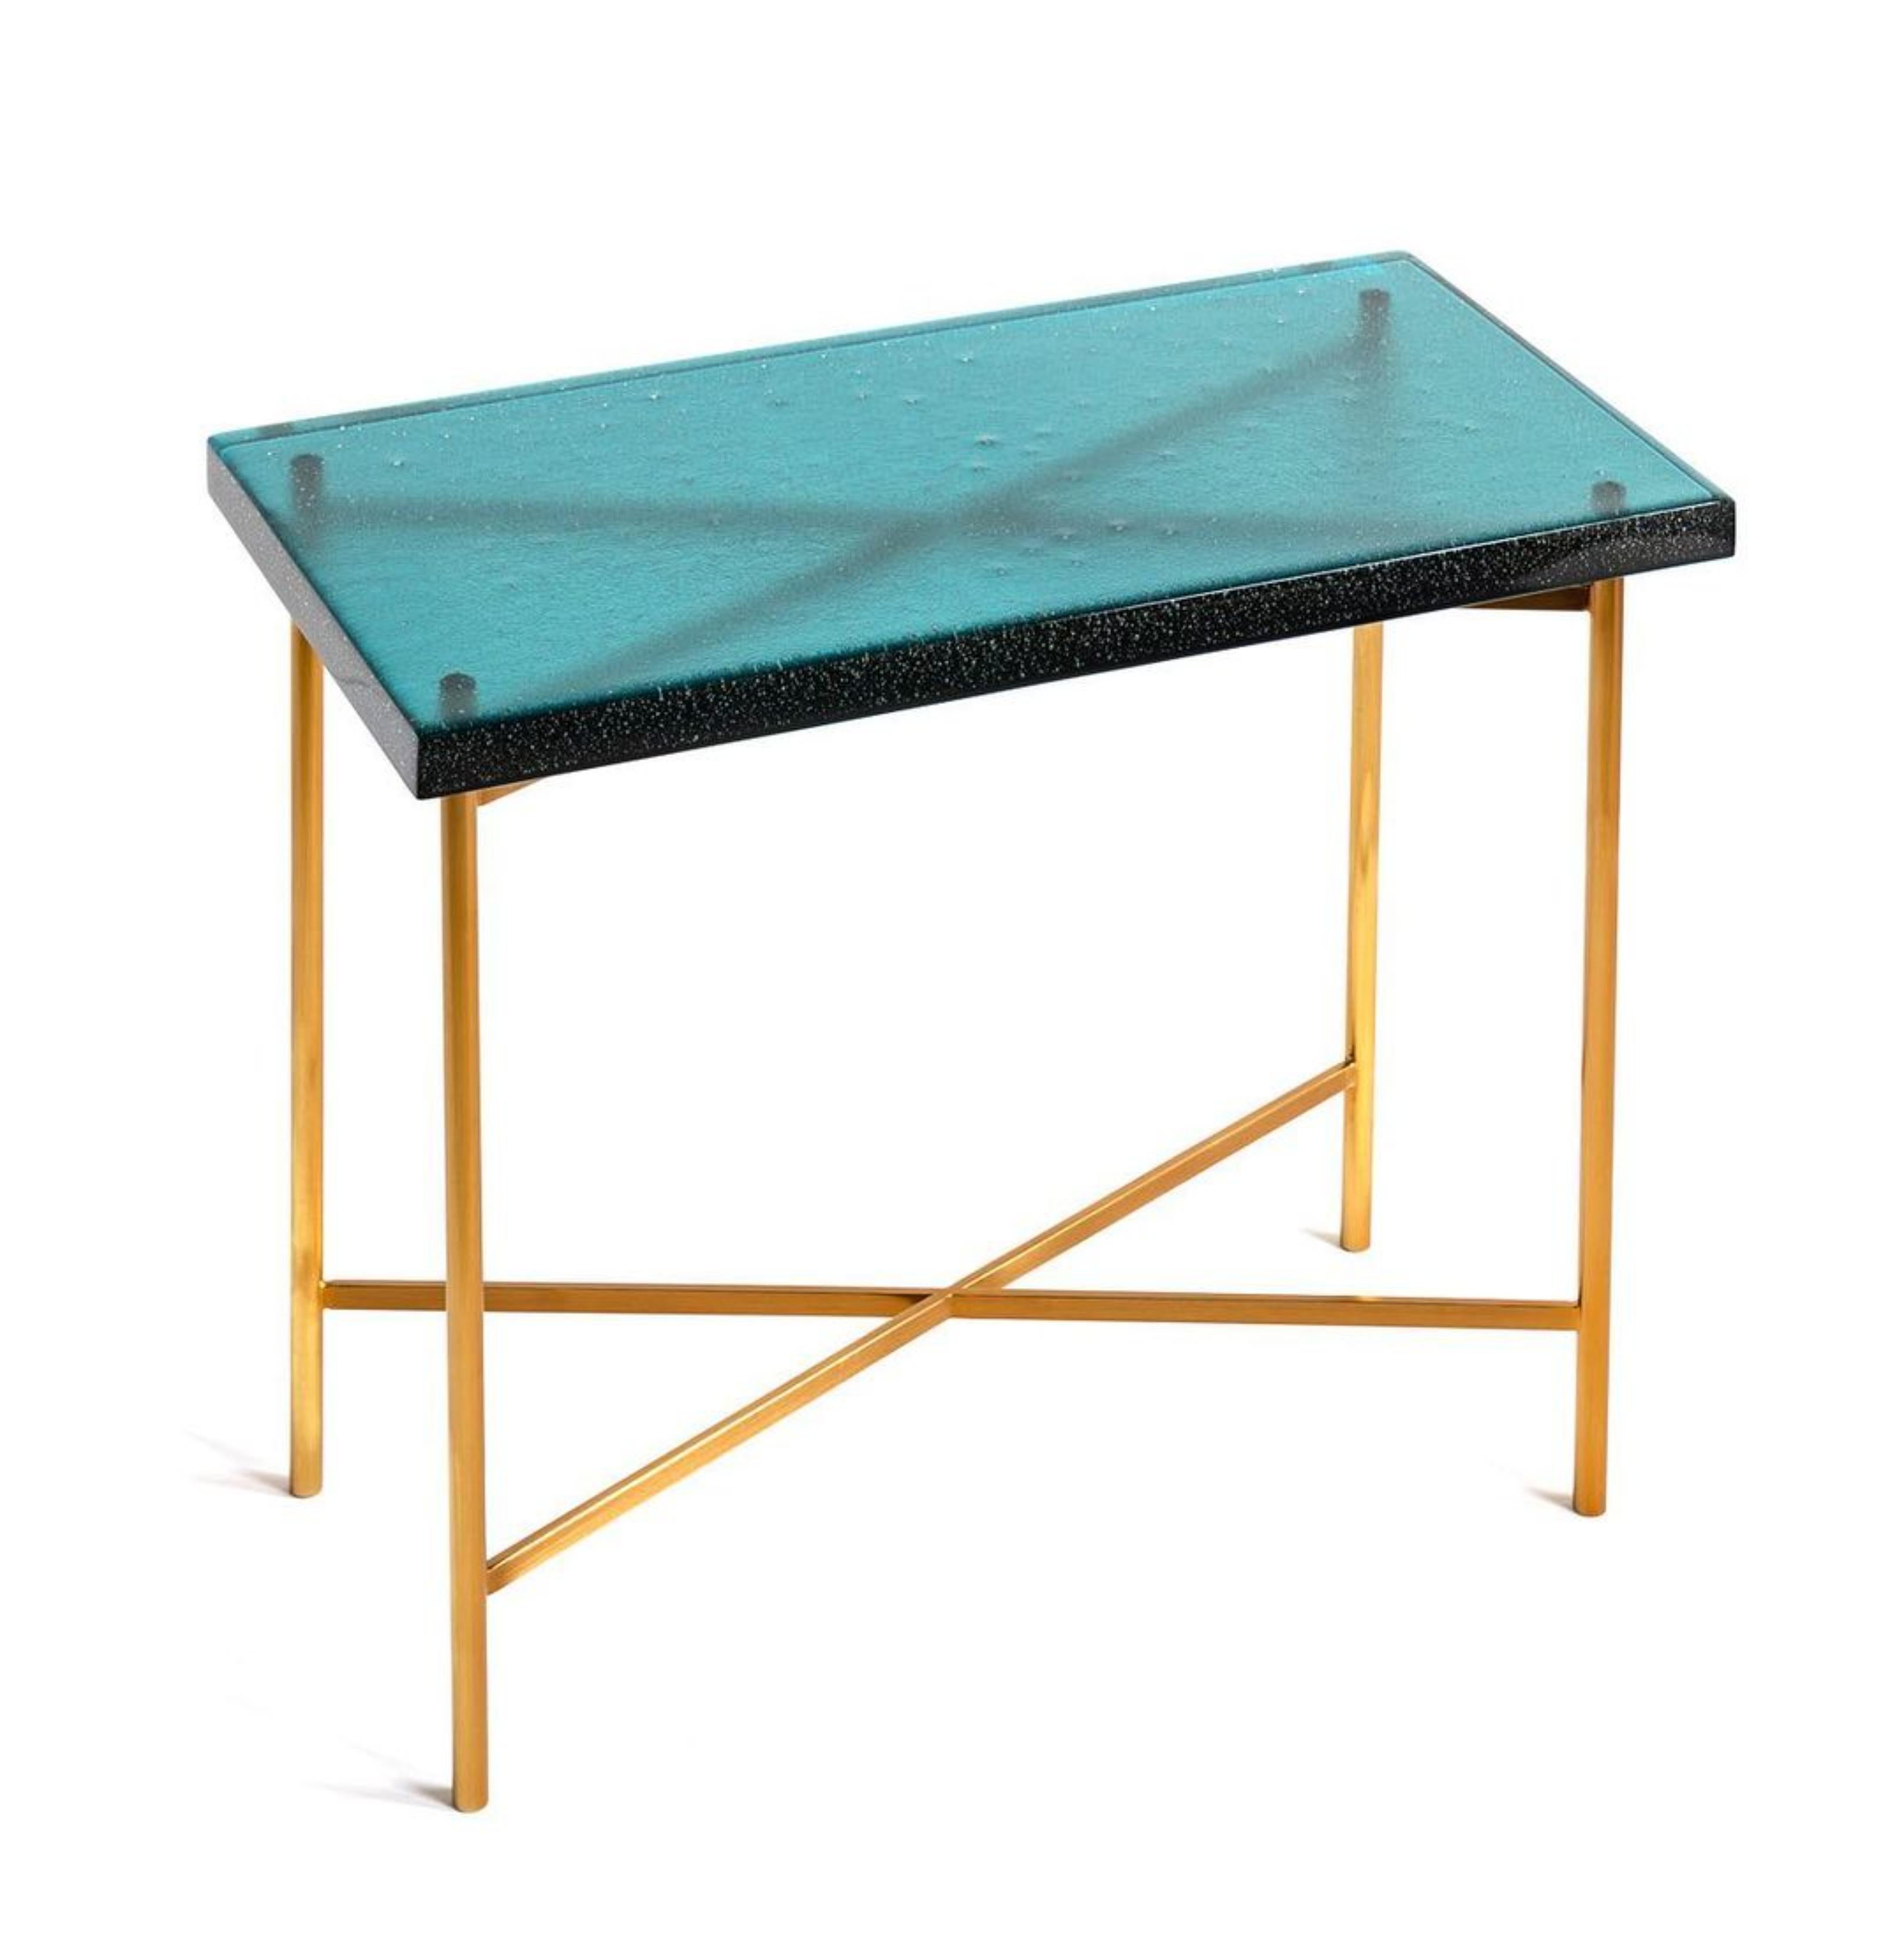 Champagne Table by The GoodMan Studio
Dimensions: W 61 x D 31 x H 53 cm 
Materials: Metal, Glass, Steel

Kilncast glass with steel base

The Goodman Studio has been internationally recognized for its modern blown glass vessels, and innovative